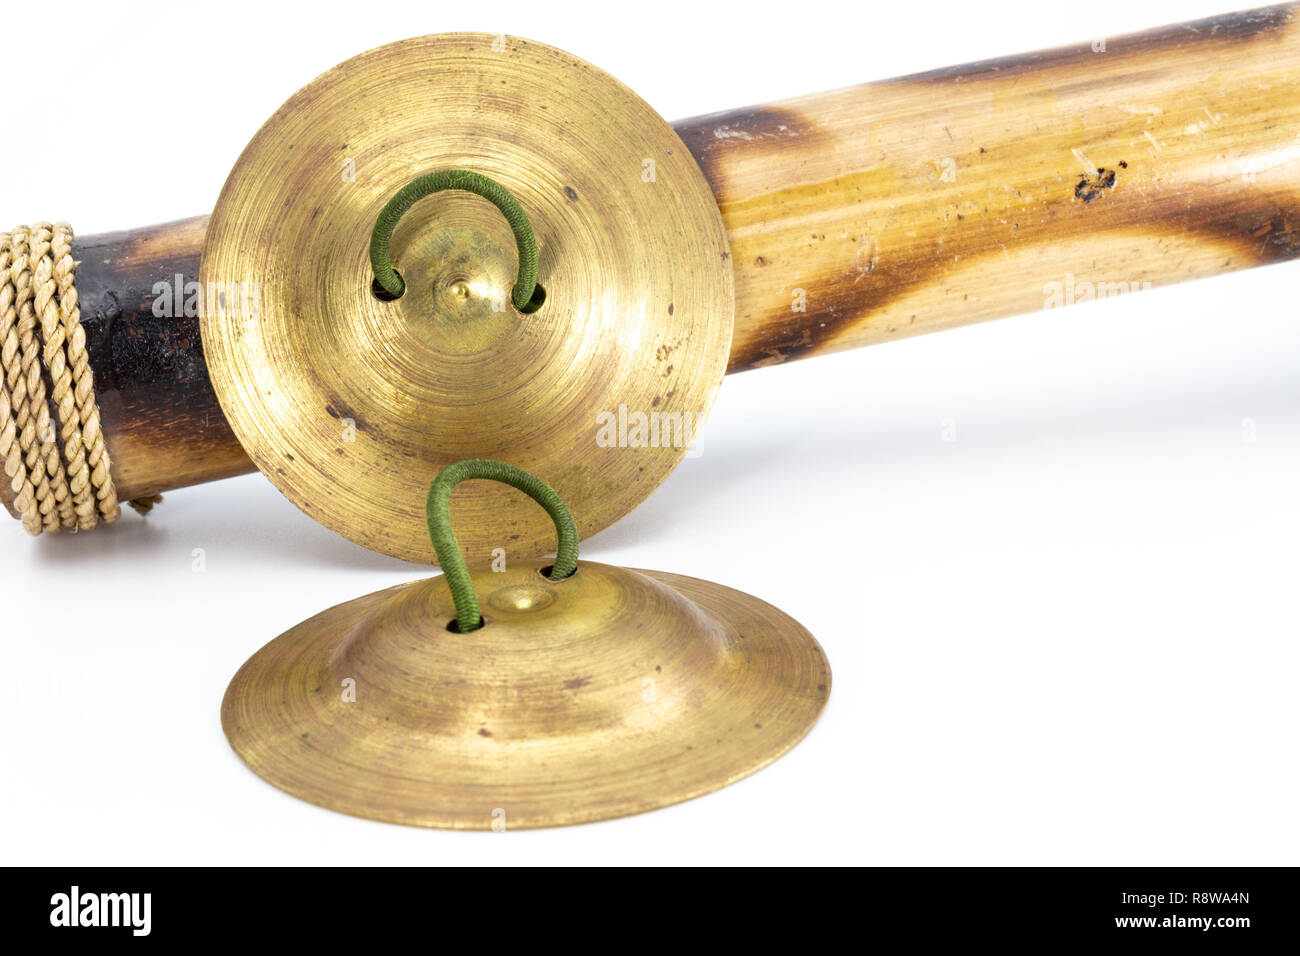 Indian finger cymbals with green rubber handle, studio photo Stock Photo